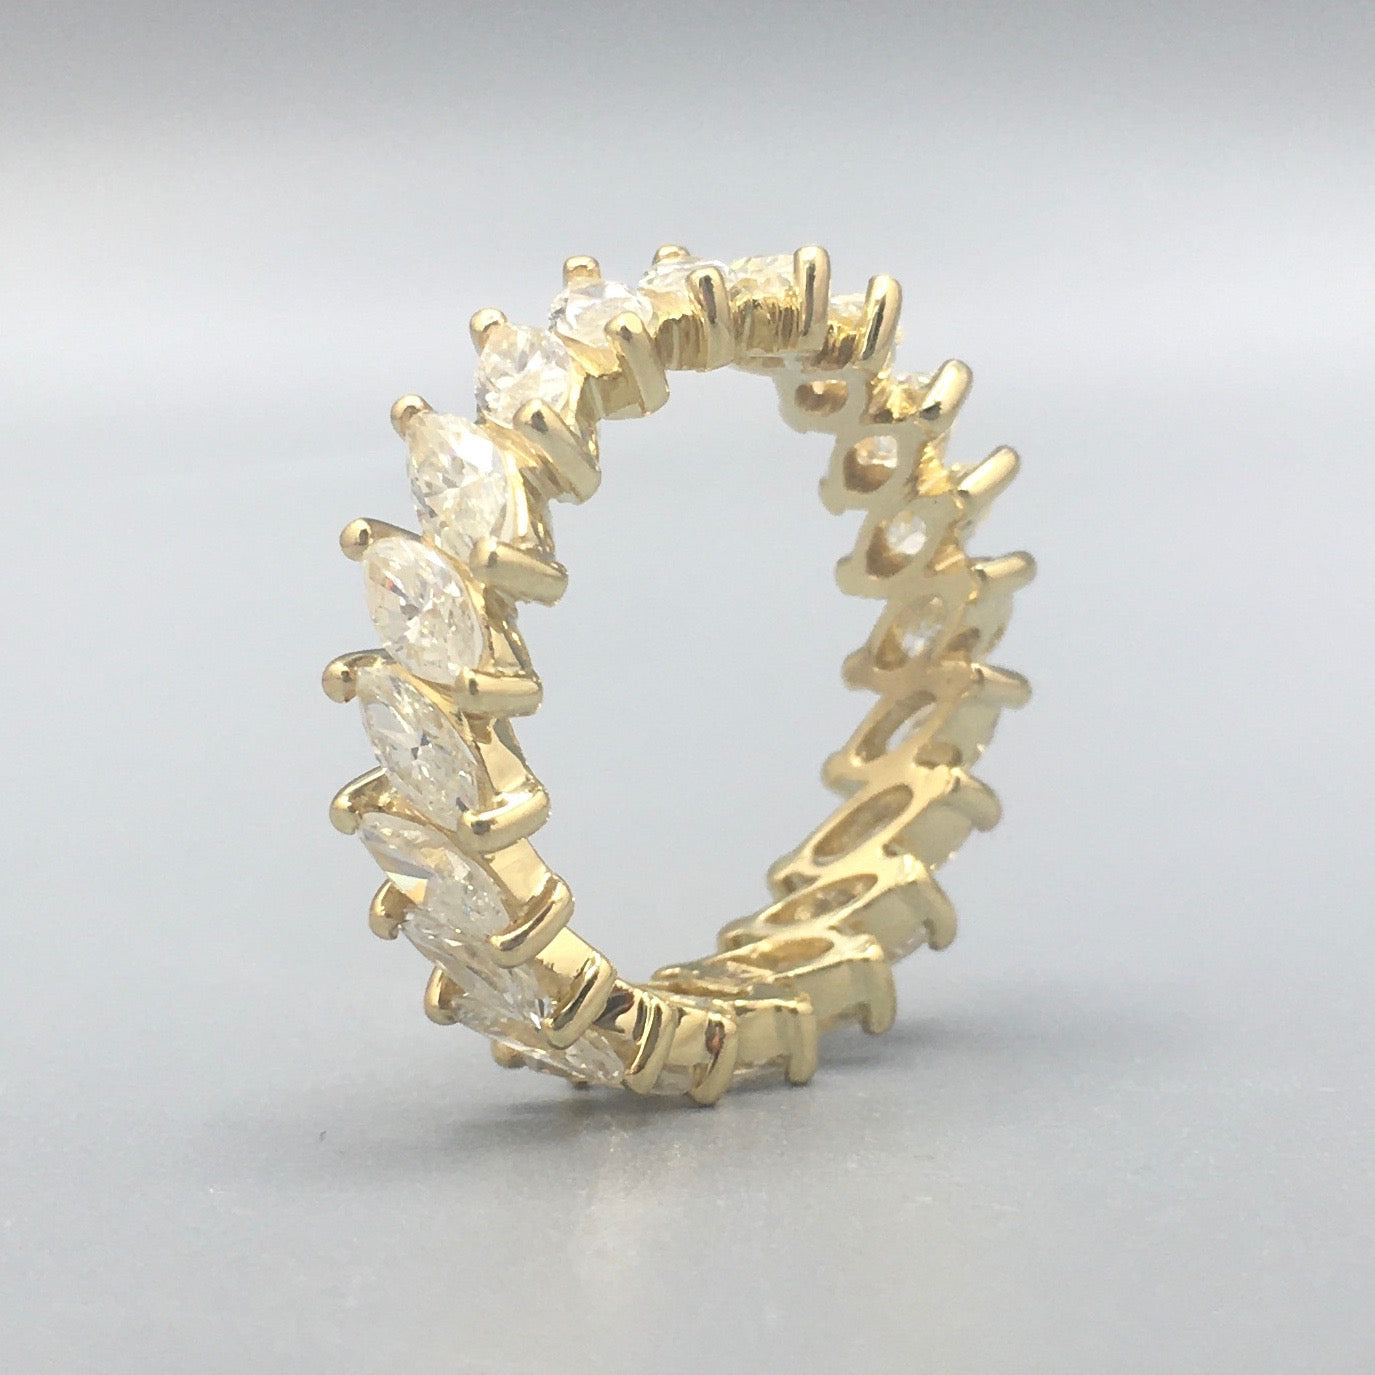 Marquise Cut Diamond Eternity Band with 20 diamonds set in 18k yellow gold